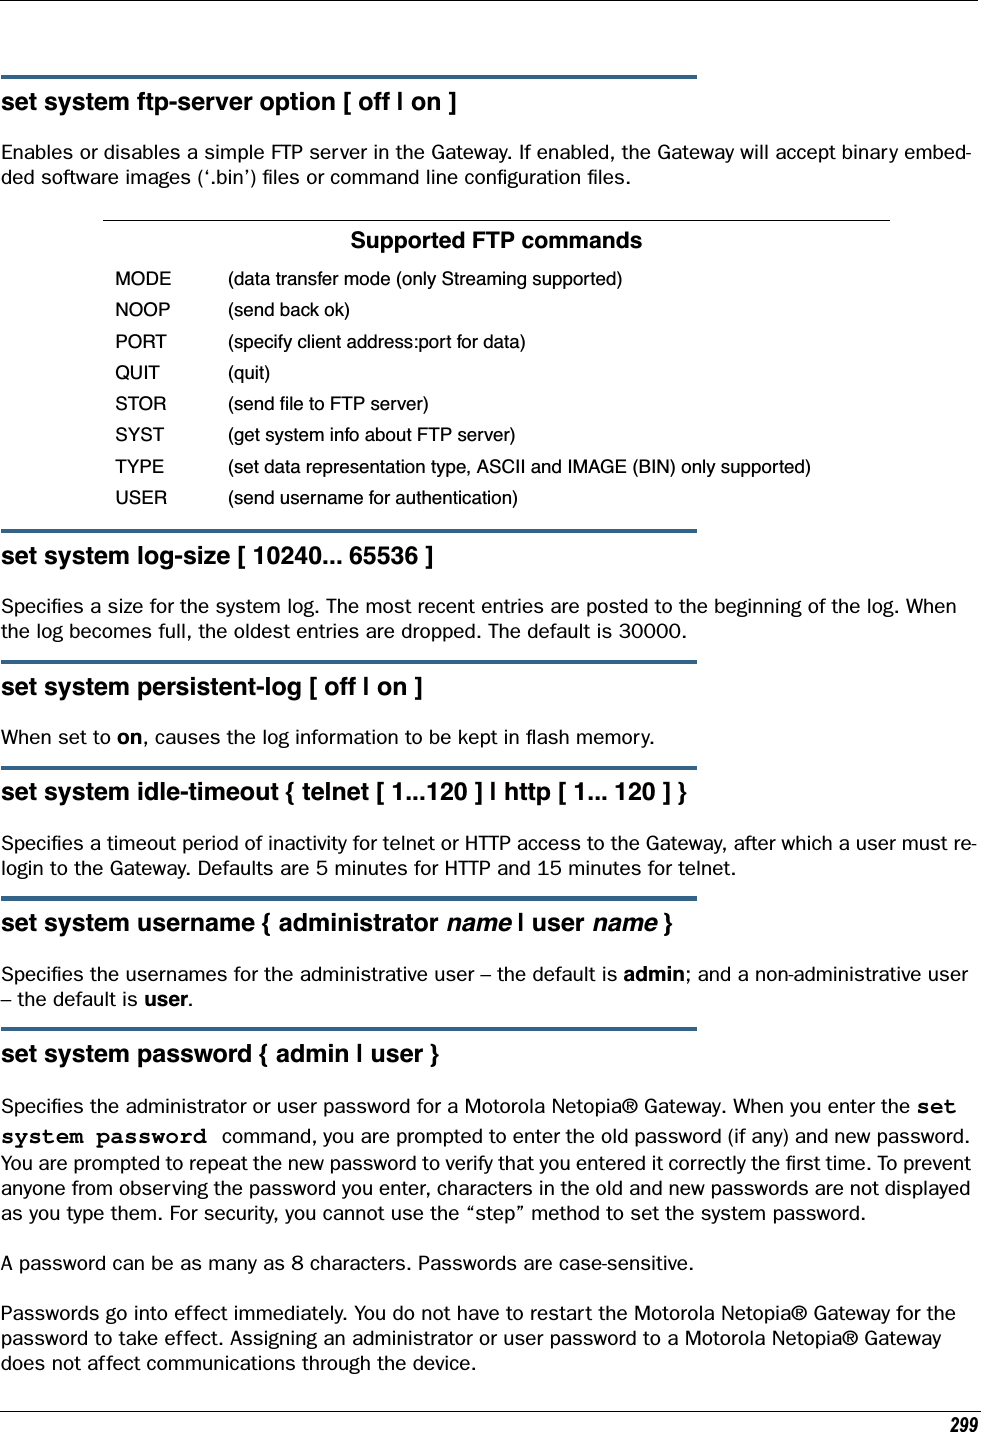 299set system ftp-server option [ off | on ]Enables or disables a simple FTP server in the Gateway. If enabled, the Gateway will accept binary embed-ded software images (‘.bin’) ﬁles or command line conﬁguration ﬁles.set system log-size [ 10240... 65536 ]Speciﬁes a size for the system log. The most recent entries are posted to the beginning of the log. When the log becomes full, the oldest entries are dropped. The default is 30000.set system persistent-log [ off | on ]When set to on, causes the log information to be kept in ﬂash memory.set system idle-timeout { telnet [ 1...120 ] | http [ 1... 120 ] }Speciﬁes a timeout period of inactivity for telnet or HTTP access to the Gateway, after which a user must re-login to the Gateway. Defaults are 5 minutes for HTTP and 15 minutes for telnet.set system username { administrator name | user name }Speciﬁes the usernames for the administrative user – the default is admin; and a non-administrative user – the default is user.set system password { admin | user }Speciﬁes the administrator or user password for a Motorola Netopia® Gateway. When you enter the set system password command, you are prompted to enter the old password (if any) and new password. You are prompted to repeat the new password to verify that you entered it correctly the ﬁrst time. To prevent anyone from observing the password you enter, characters in the old and new passwords are not displayed as you type them. For security, you cannot use the “step” method to set the system password.A password can be as many as 8 characters. Passwords are case-sensitive. Passwords go into effect immediately. You do not have to restart the Motorola Netopia® Gateway for the password to take effect. Assigning an administrator or user password to a Motorola Netopia® Gateway does not affect communications through the device. Supported FTP commandsMODE (data transfer mode (only Streaming supported)NOOP (send back ok)PORT (specify client address:port for data)QUIT (quit)STOR (send ﬁle to FTP server)SYST (get system info about FTP server)TYPE (set data representation type, ASCII and IMAGE (BIN) only supported)USER (send username for authentication)